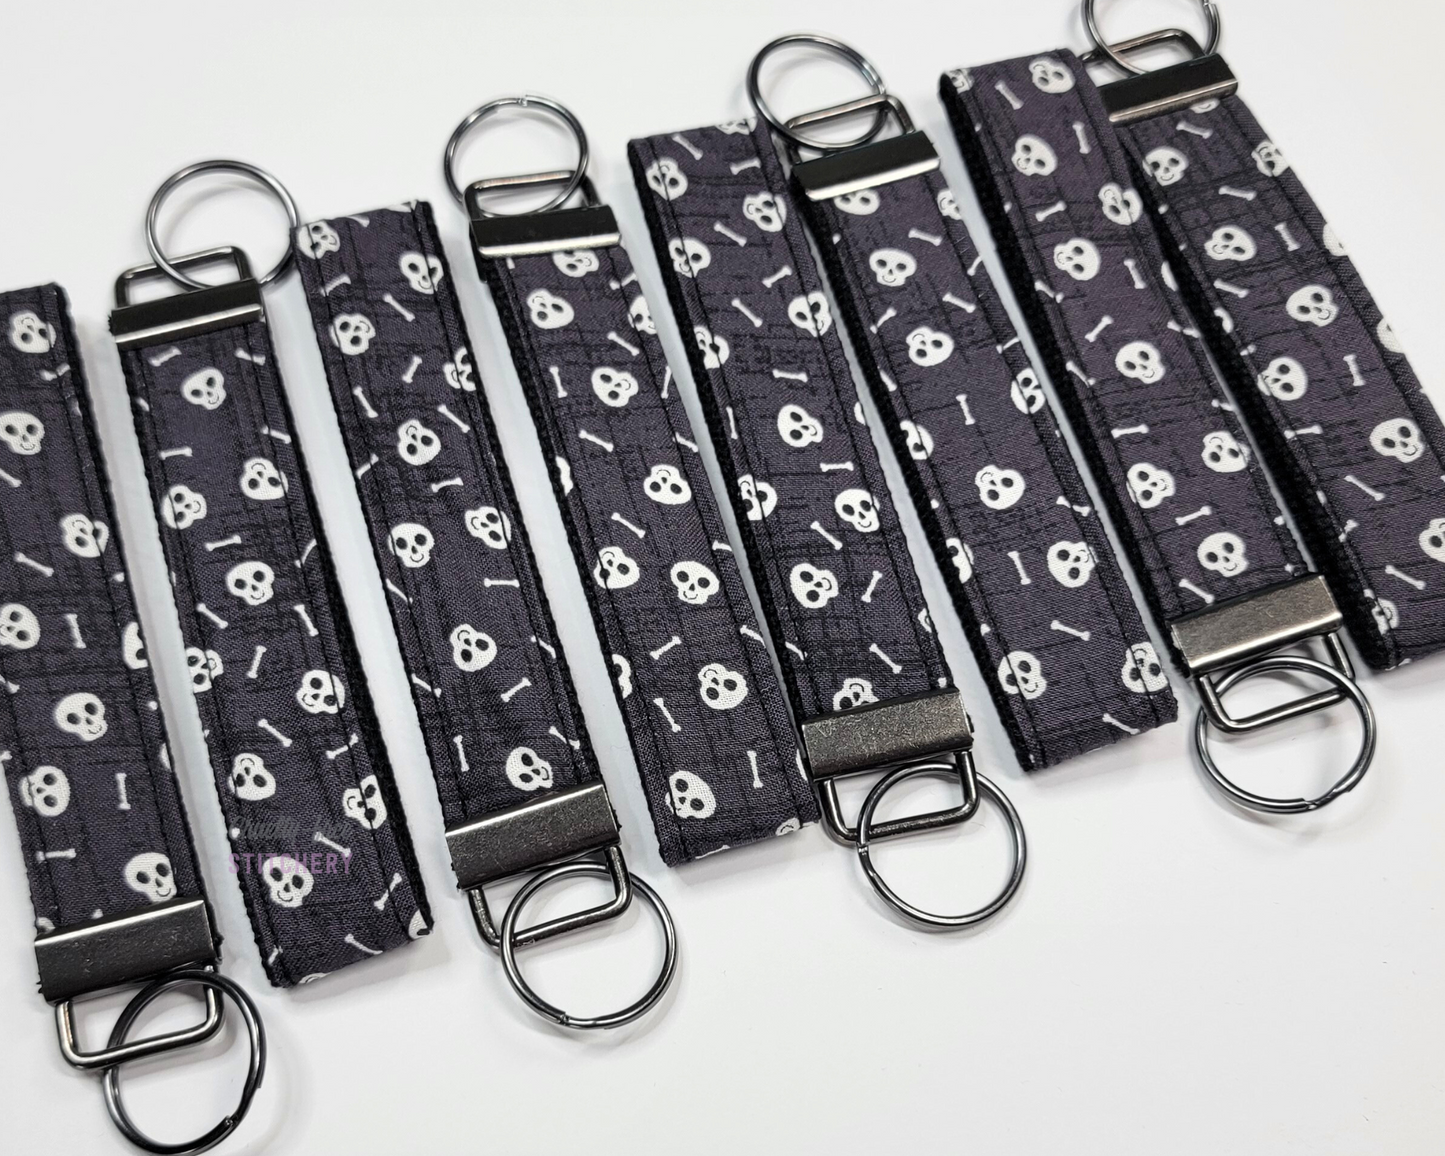 Wristlet key fobs arranged in a row of eight with ends alternating. The wristlet is dark grey with tiny white skulls and bones. The hardware and key ring are gunmetal silver.